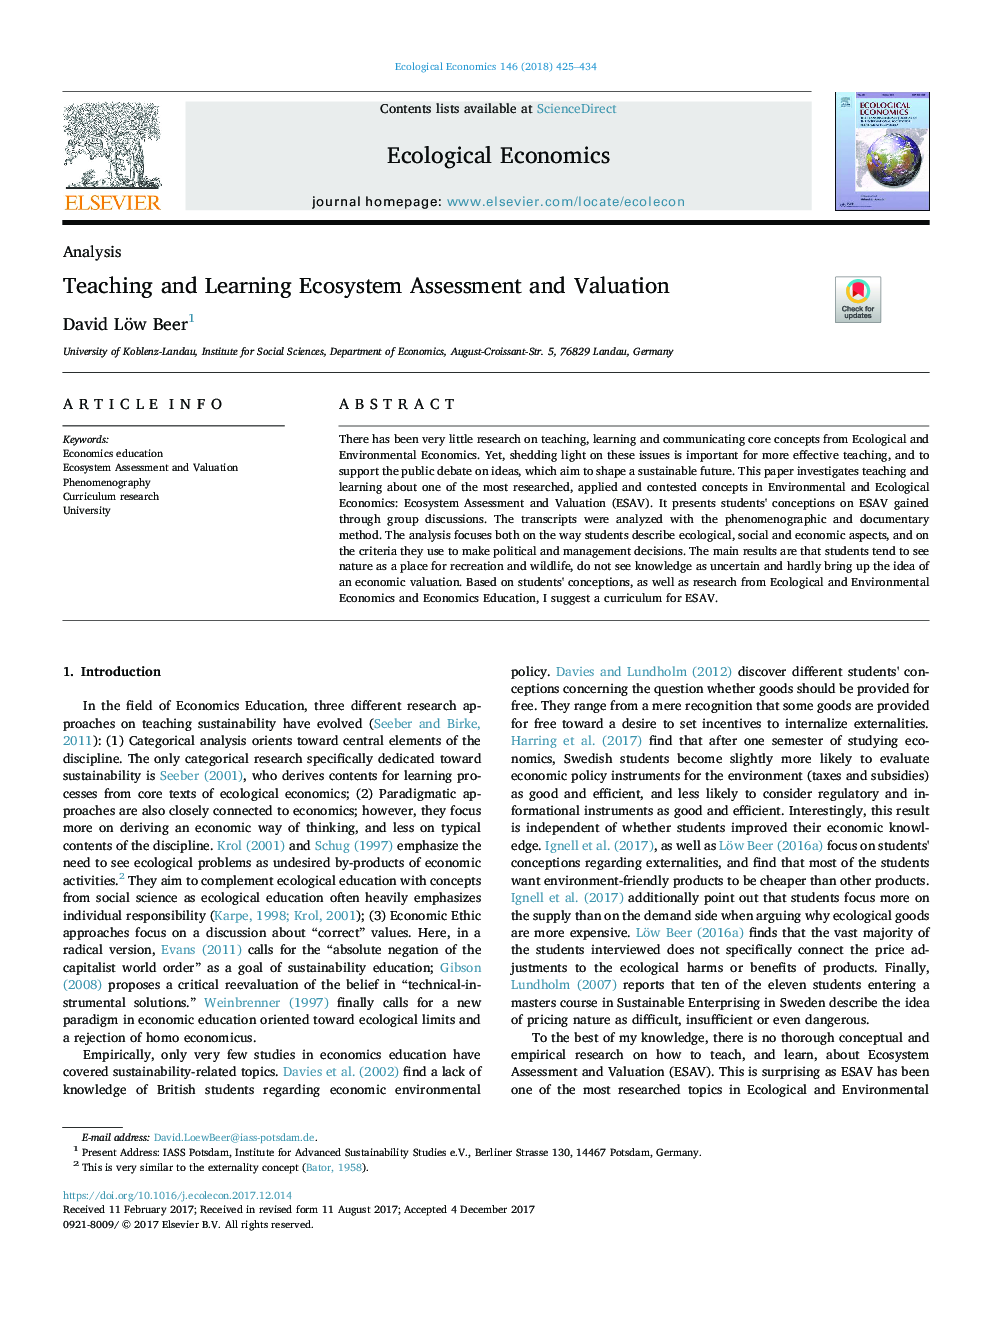 Teaching and Learning Ecosystem Assessment and Valuation